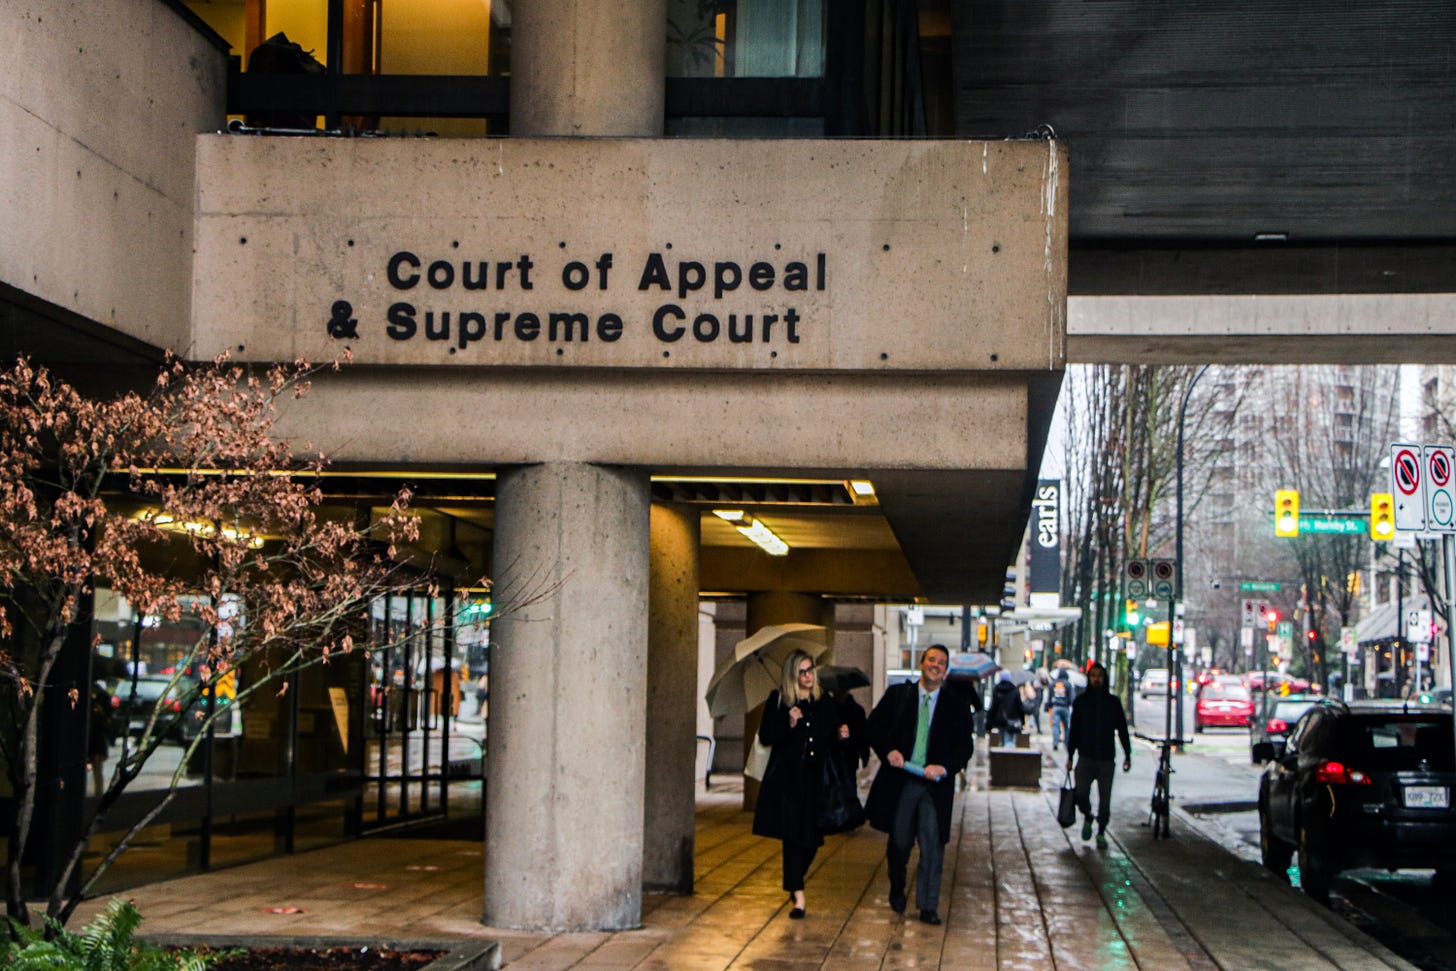 the entrance to the supreme court and court of appeal of BC in downtown vancouver on a rainy day, with people walking about in front of the entrance and beyond bearing umbrellas